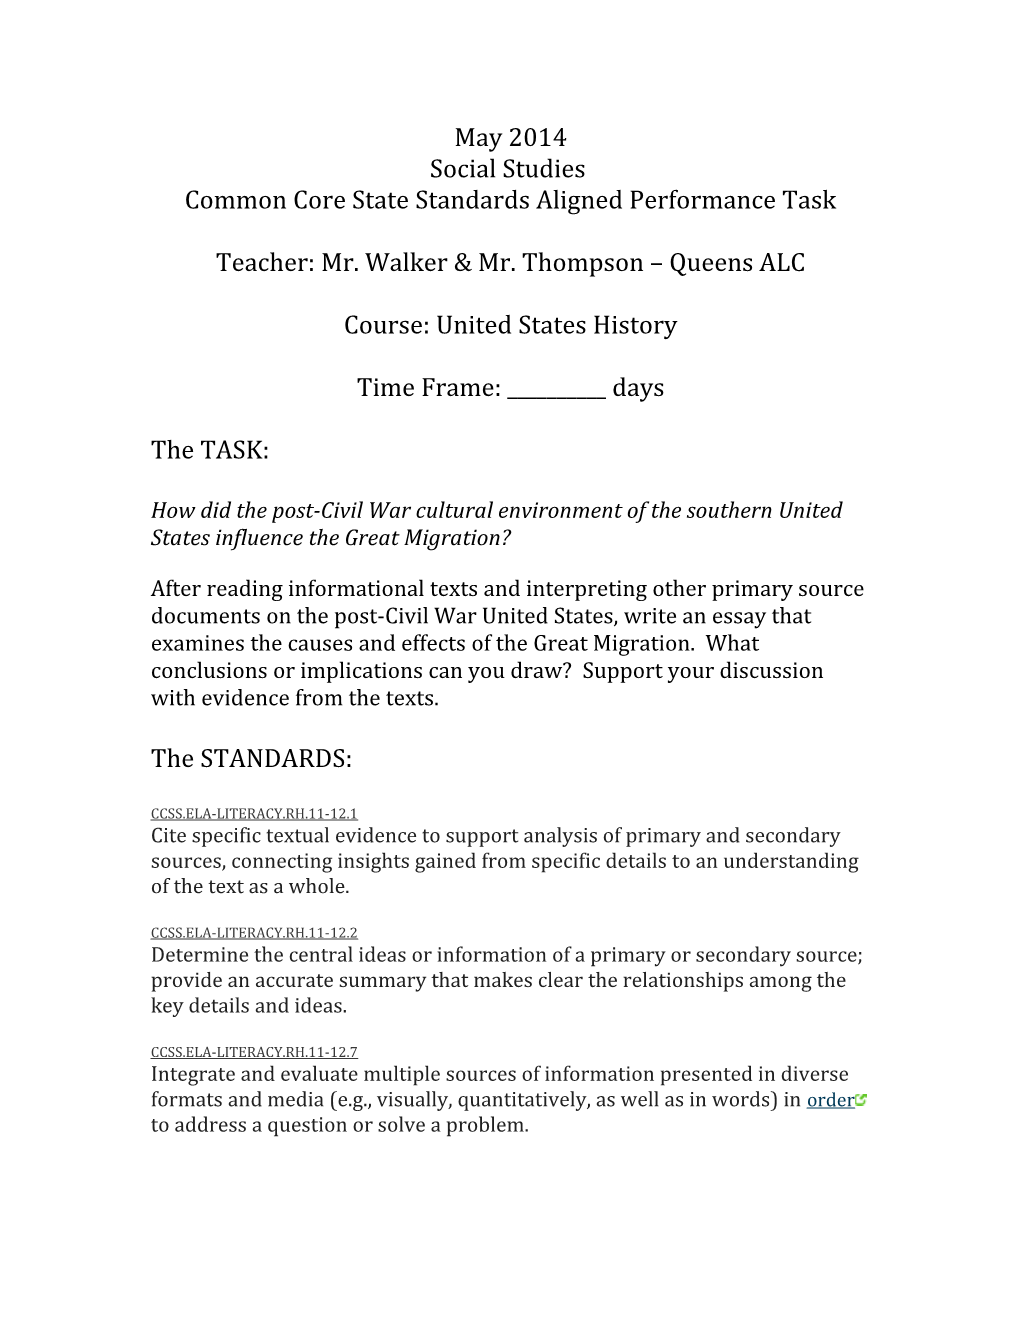 Common Core State Standards Aligned Performance Task